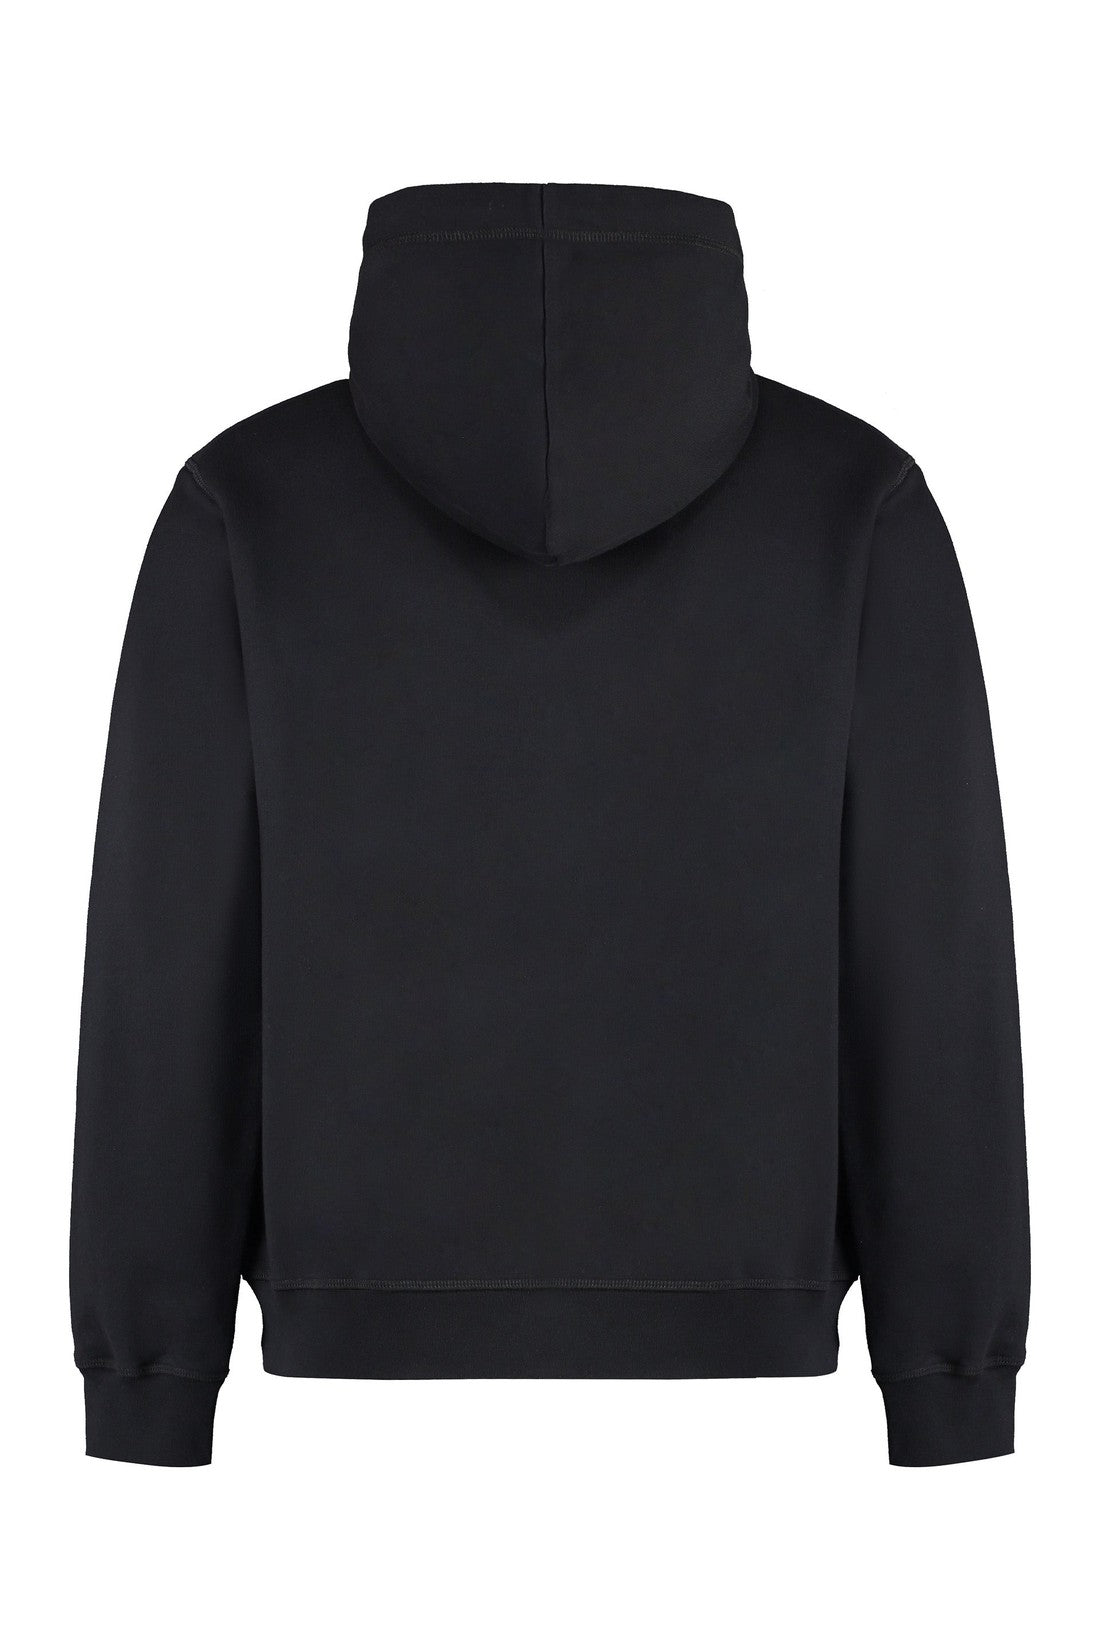 Dsquared2-OUTLET-SALE-Full zip hoodie-ARCHIVIST